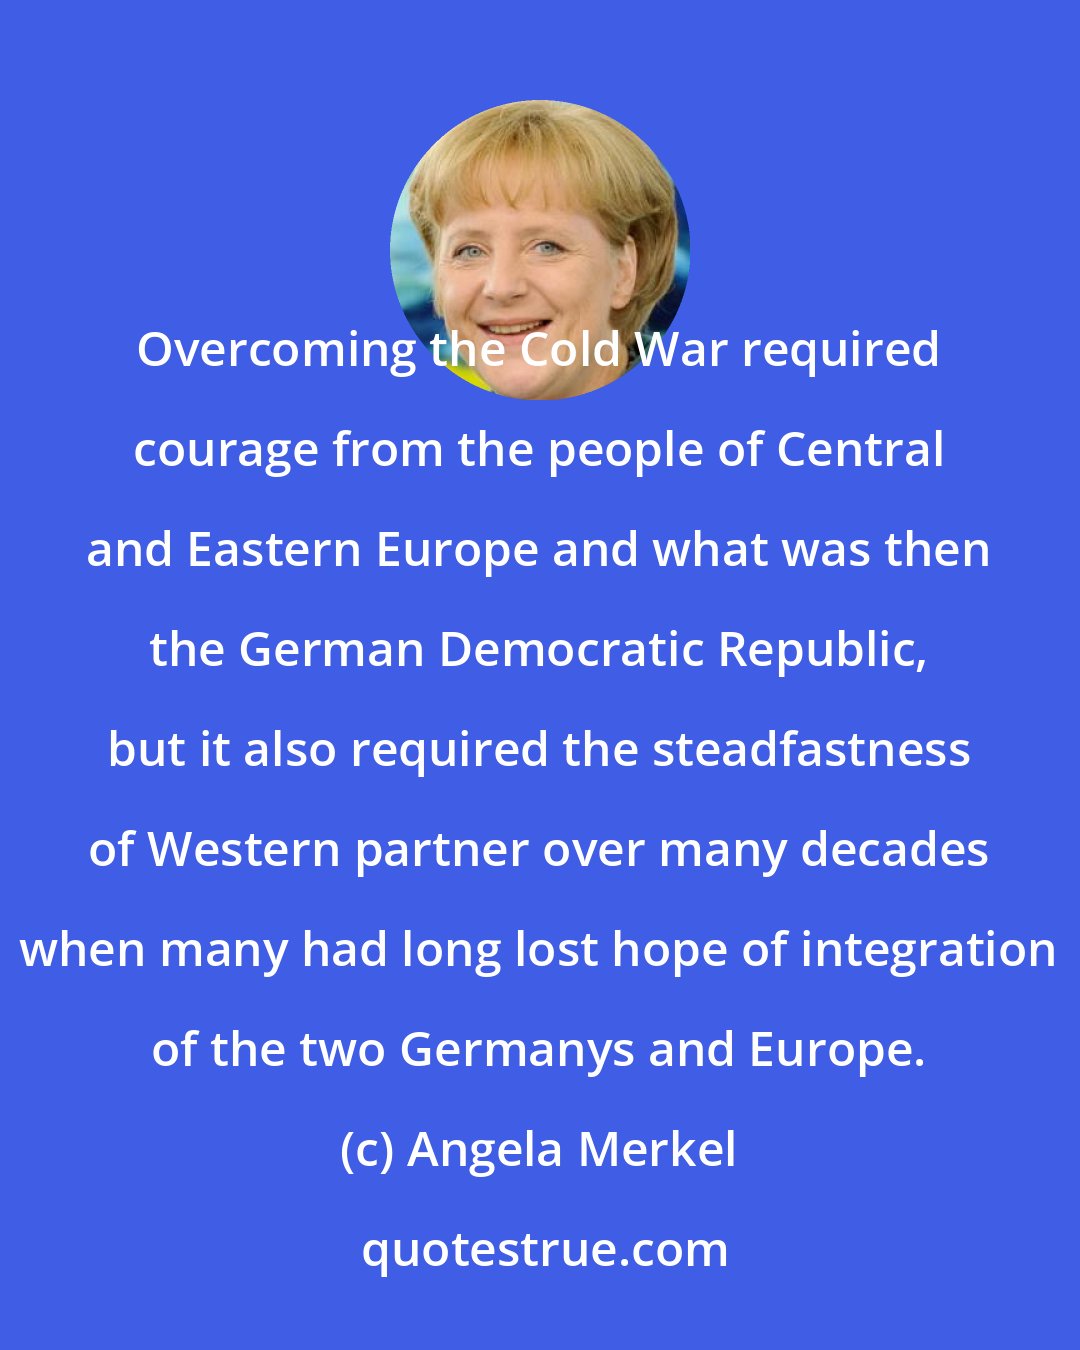 Angela Merkel: Overcoming the Cold War required courage from the people of Central and Eastern Europe and what was then the German Democratic Republic, but it also required the steadfastness of Western partner over many decades when many had long lost hope of integration of the two Germanys and Europe.